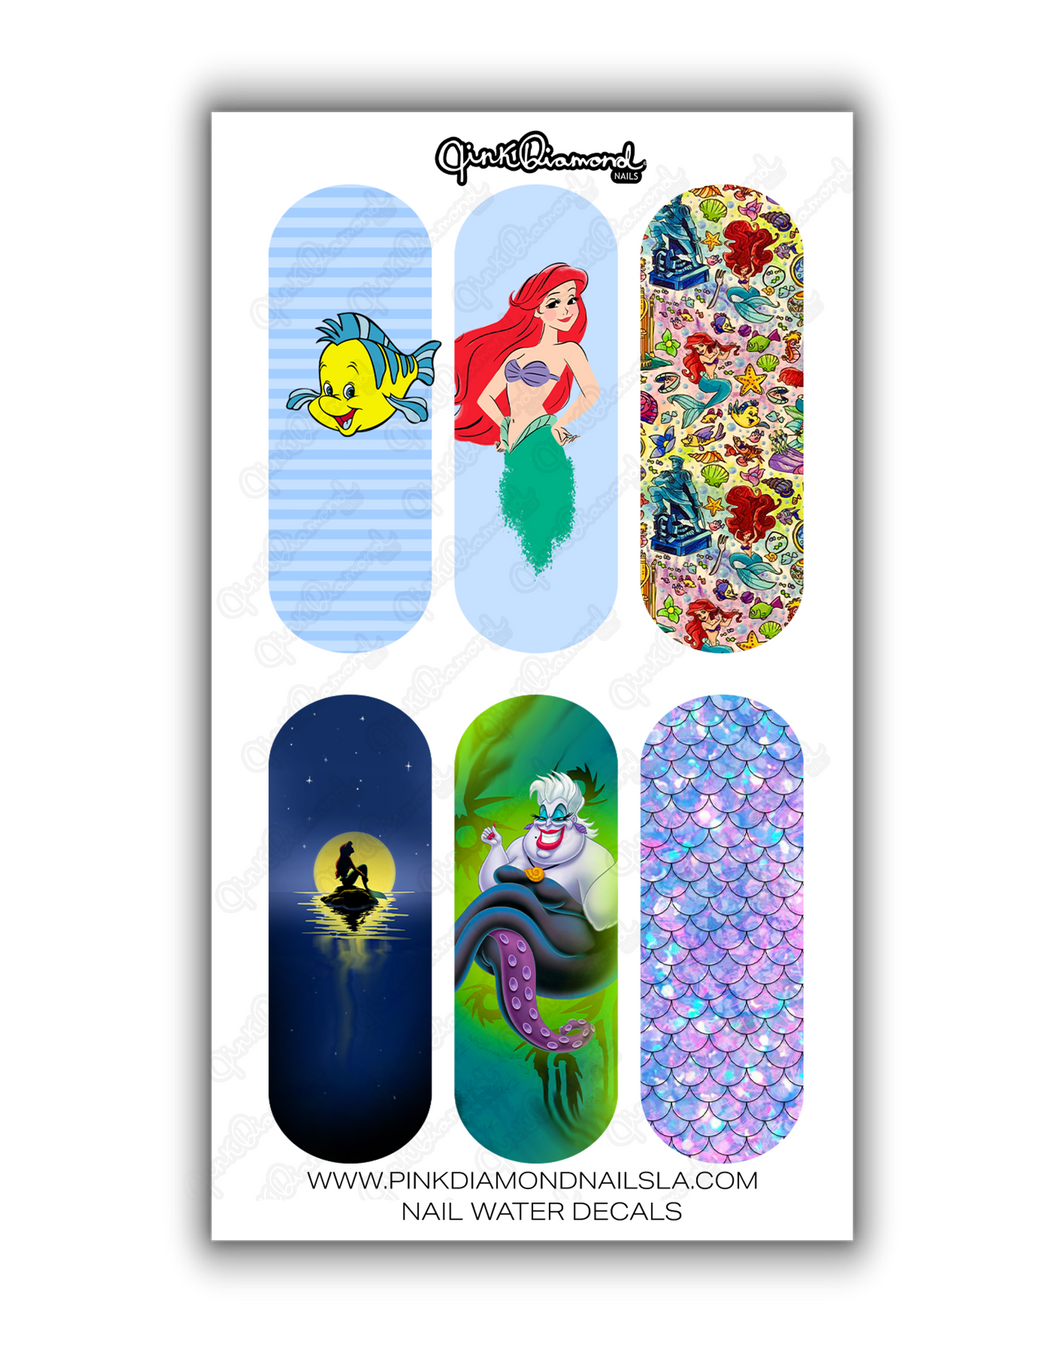 Nail water decals- XL The little mermaid